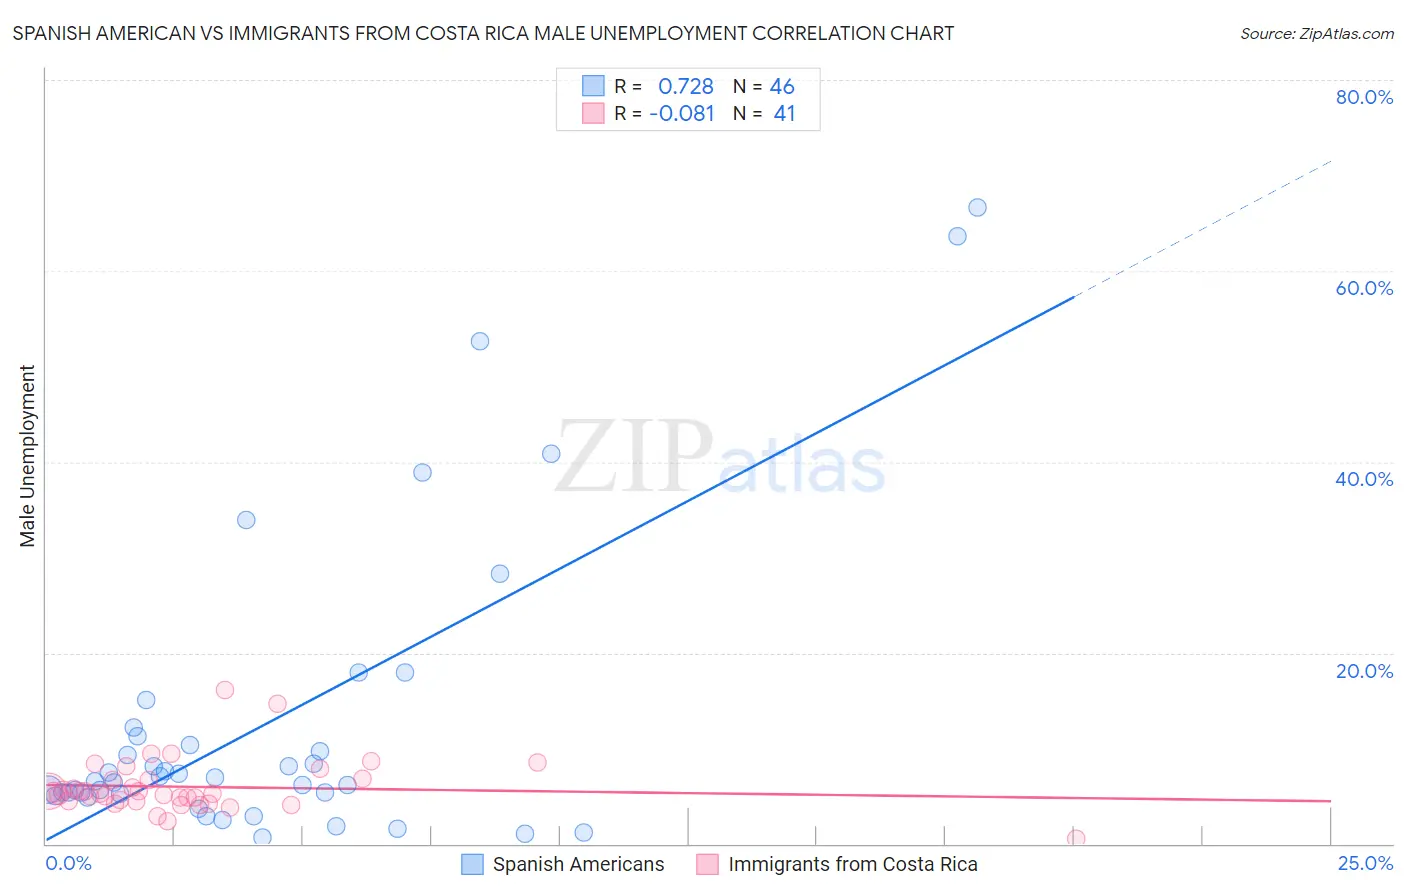 Spanish American vs Immigrants from Costa Rica Male Unemployment